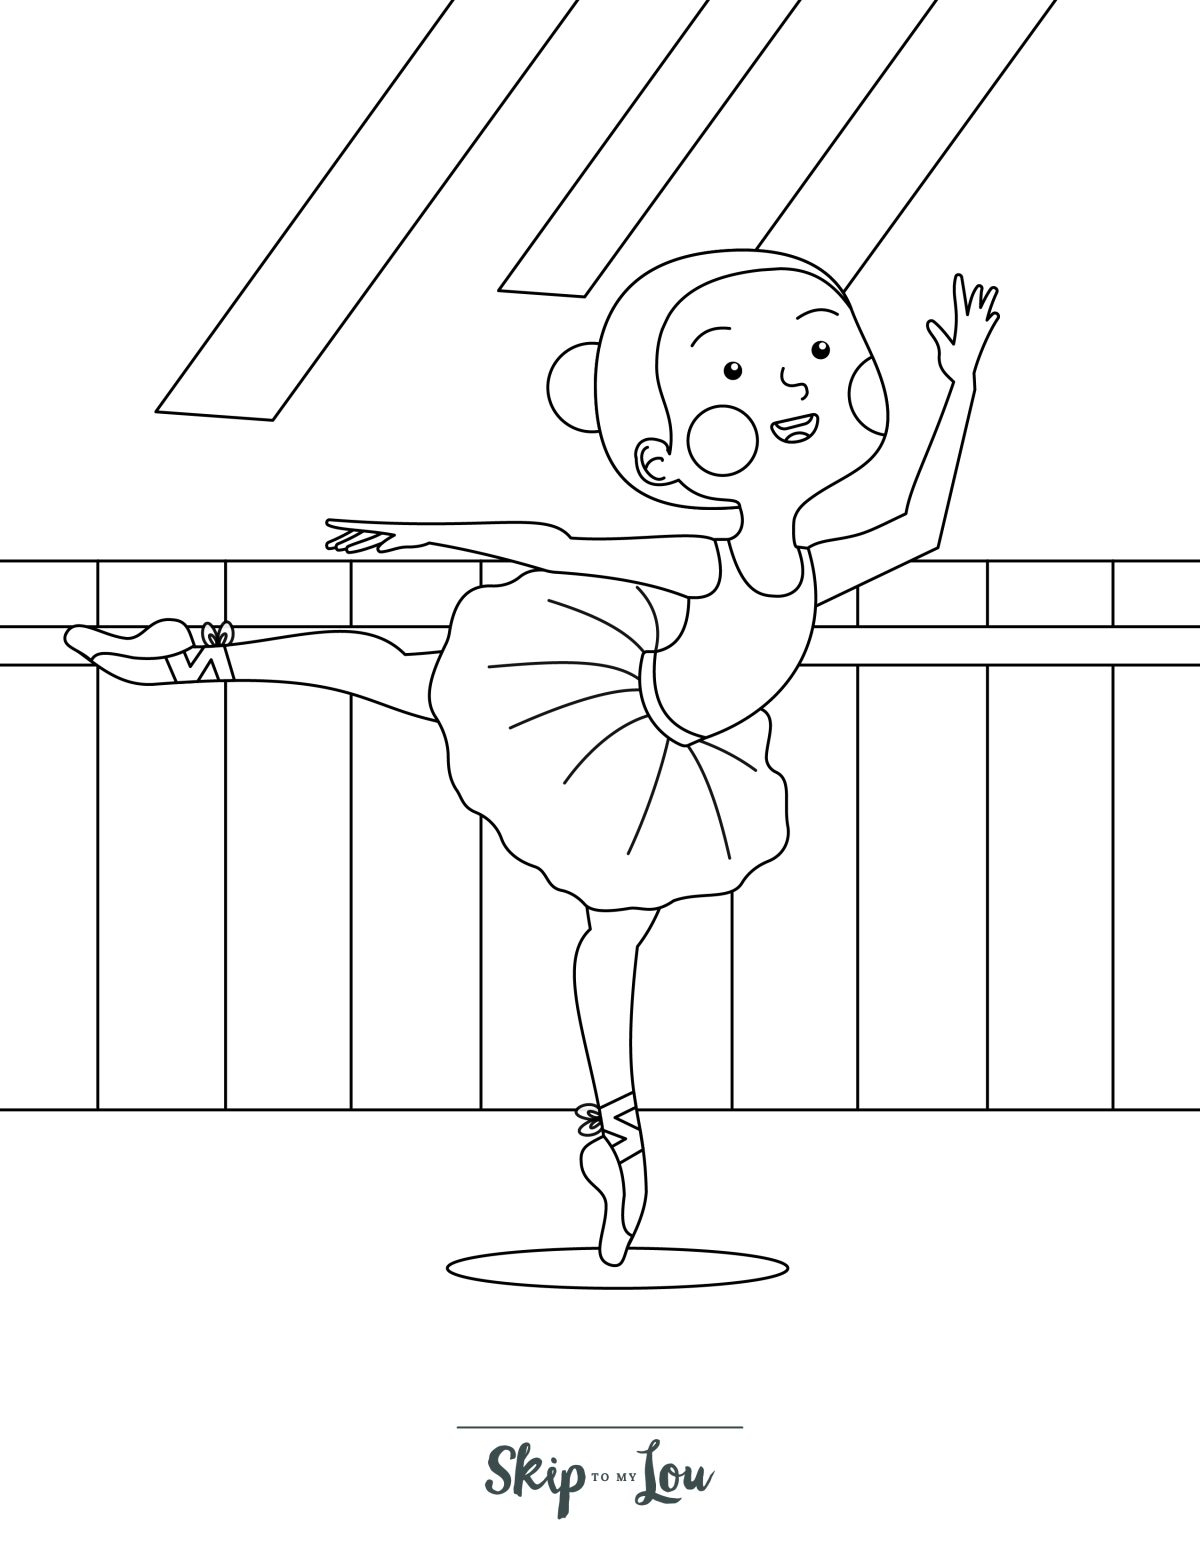 Ballerina Coloring Pages - Free Beautiful Ballet Printables | Skip - Free Printable Dance Pictures